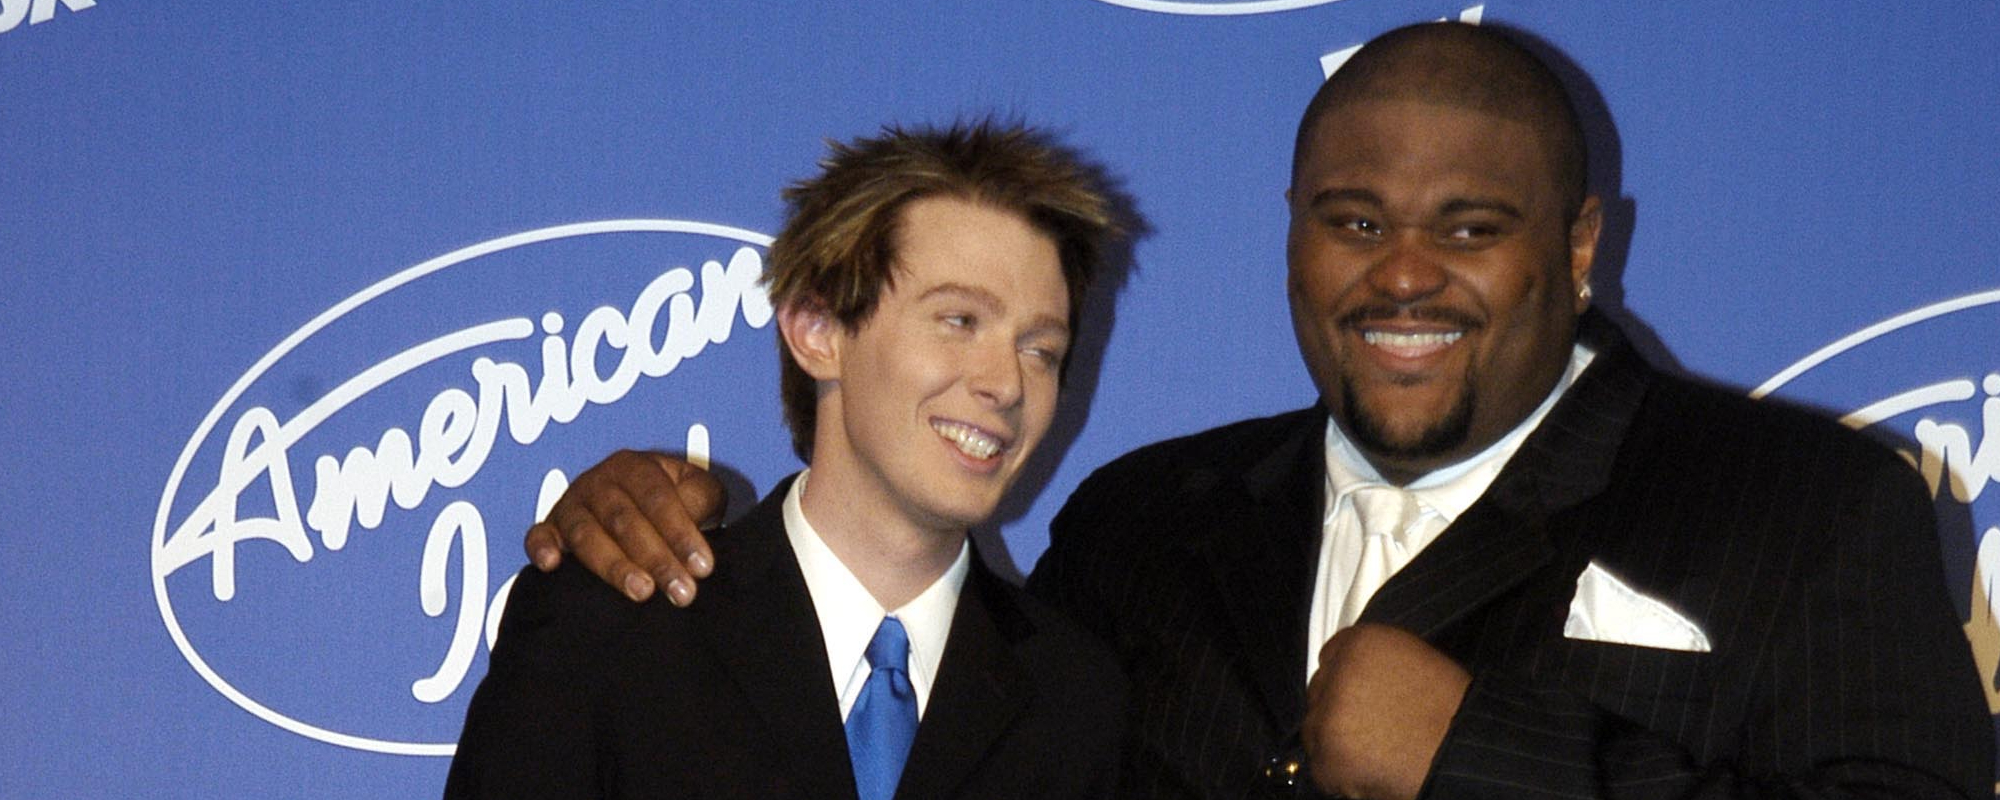 Clay Aiken Opens up About His Friendship With Ruben Studdard: “We Never Left Each Other’s Side After American Idol”